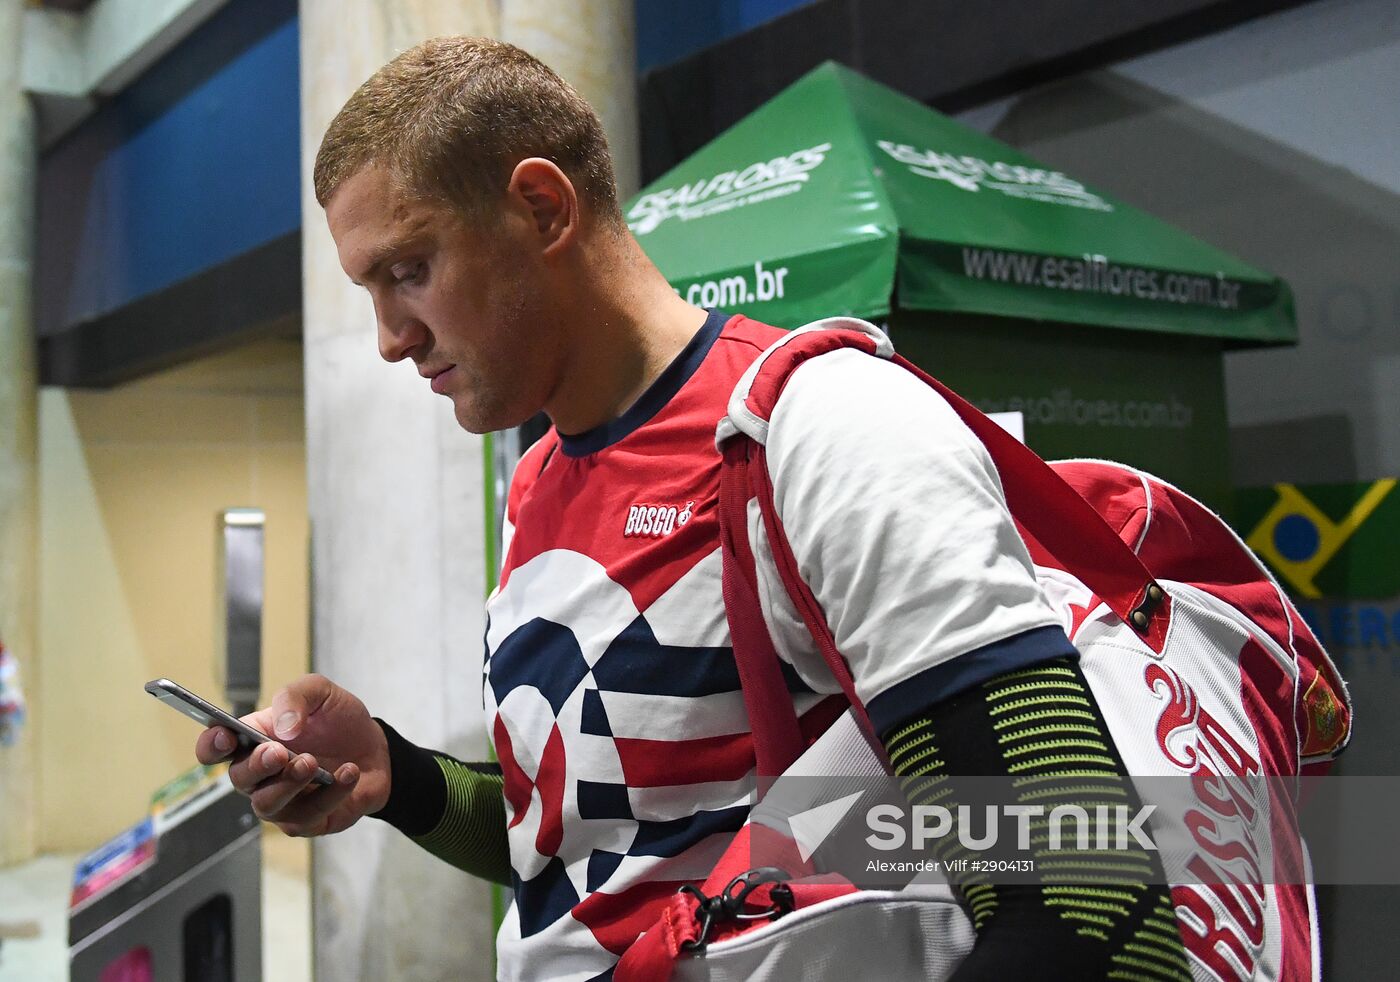 Russian swimmers arrive at Olympic Games in Rio deJaneiro